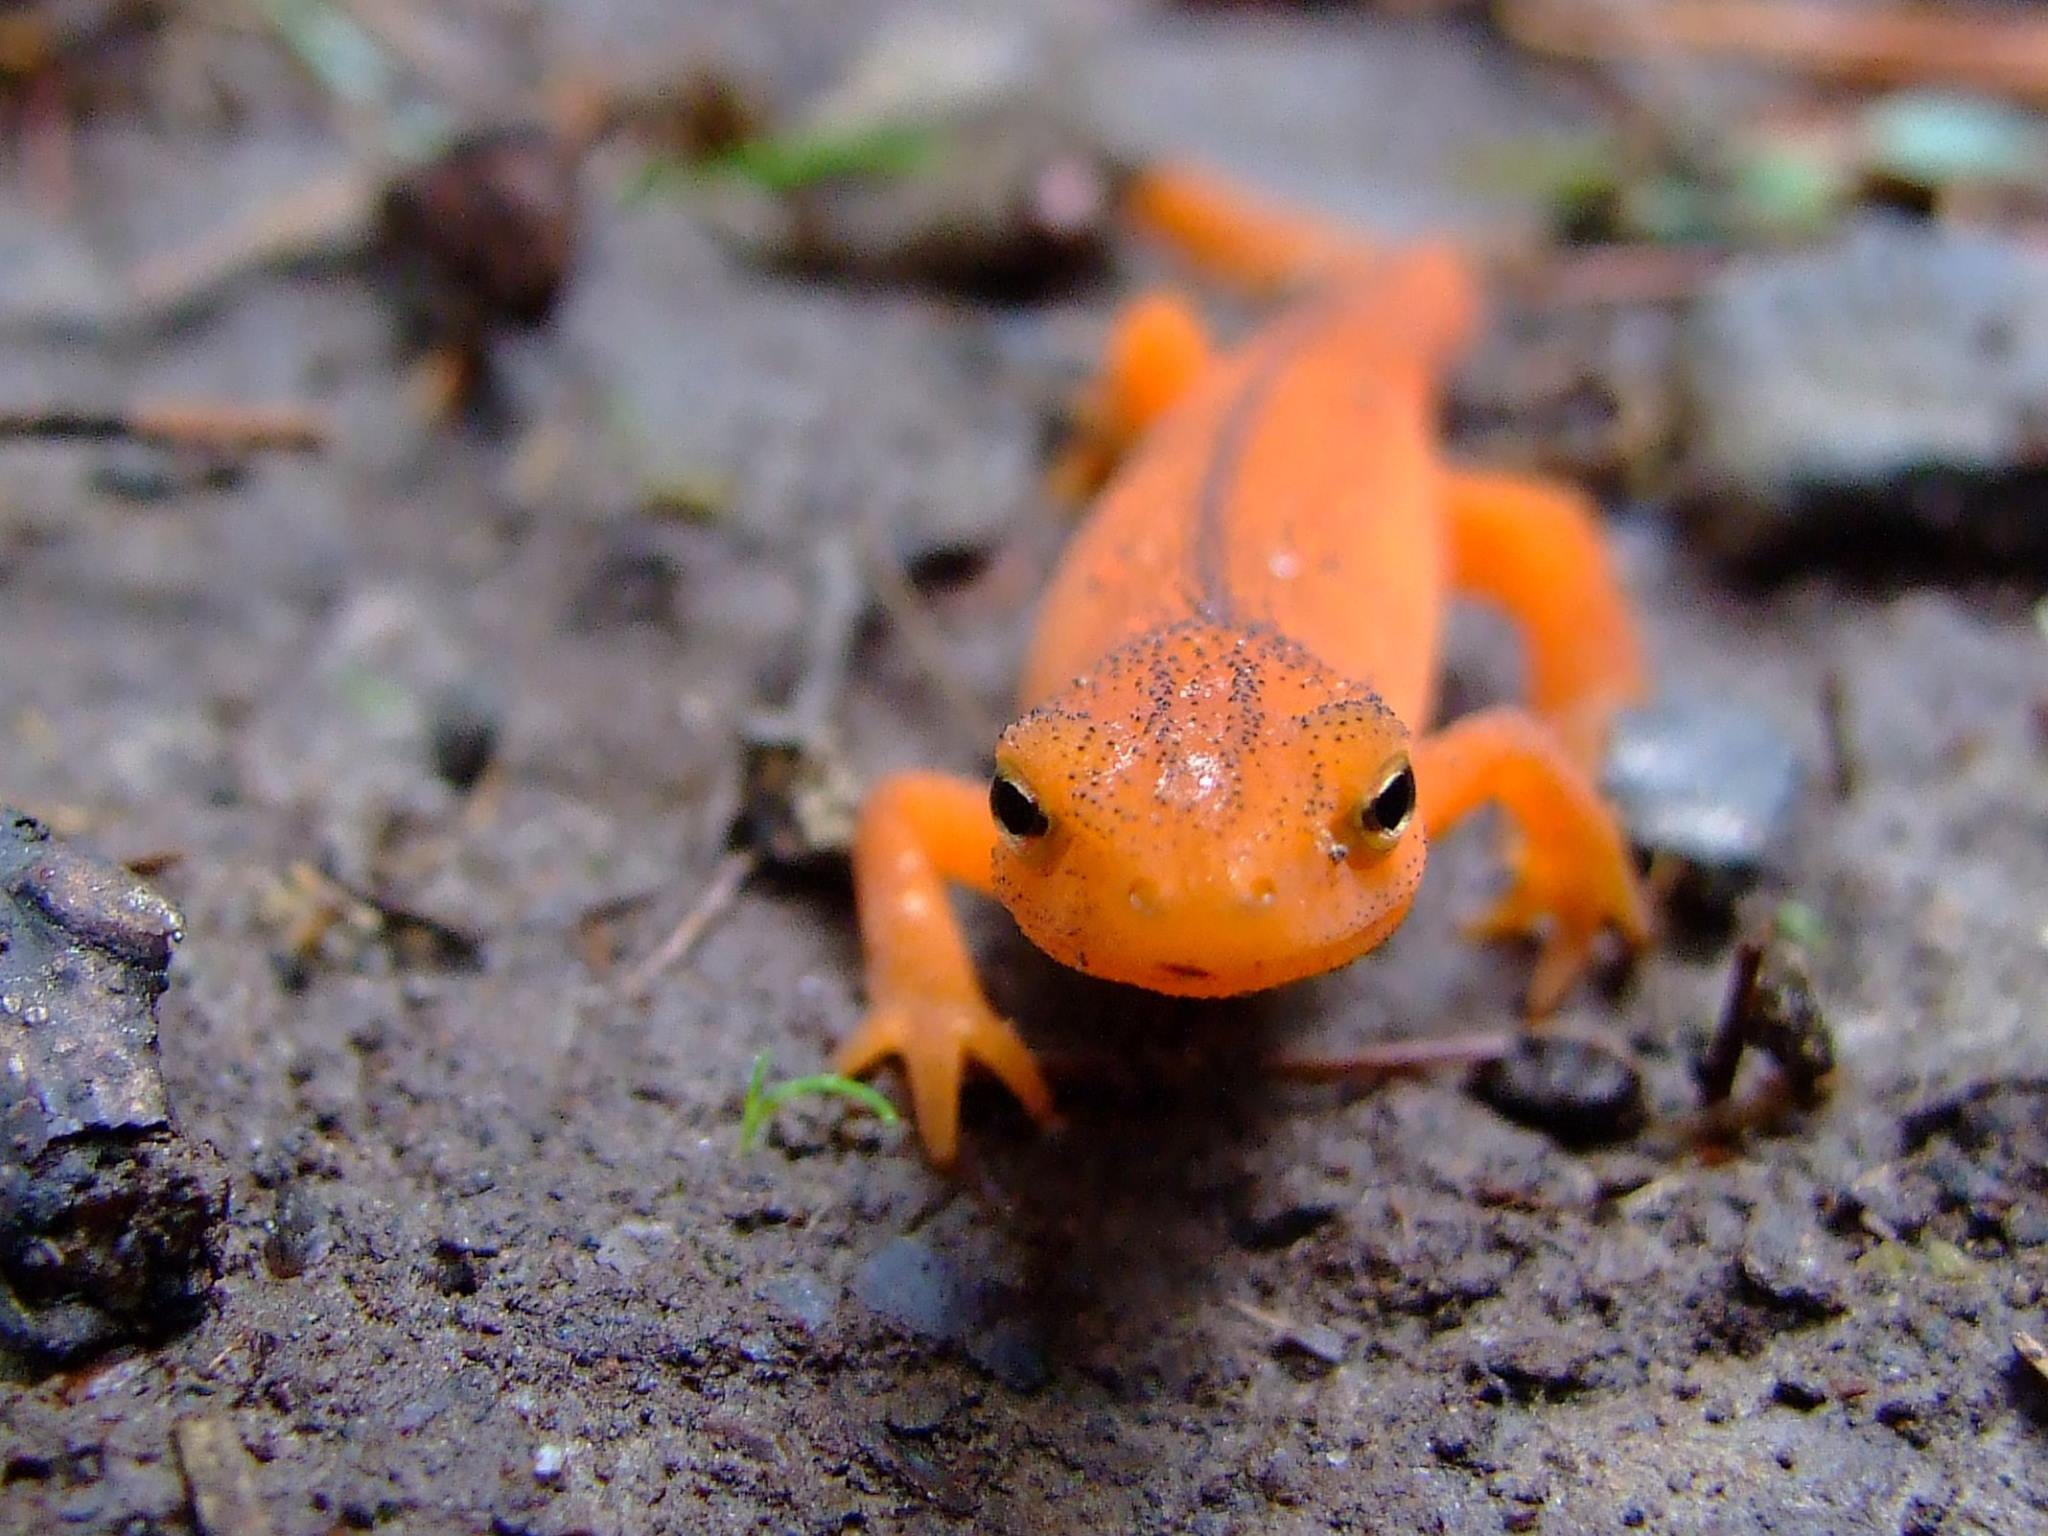 Eastern Newt crawls on the forest floor.